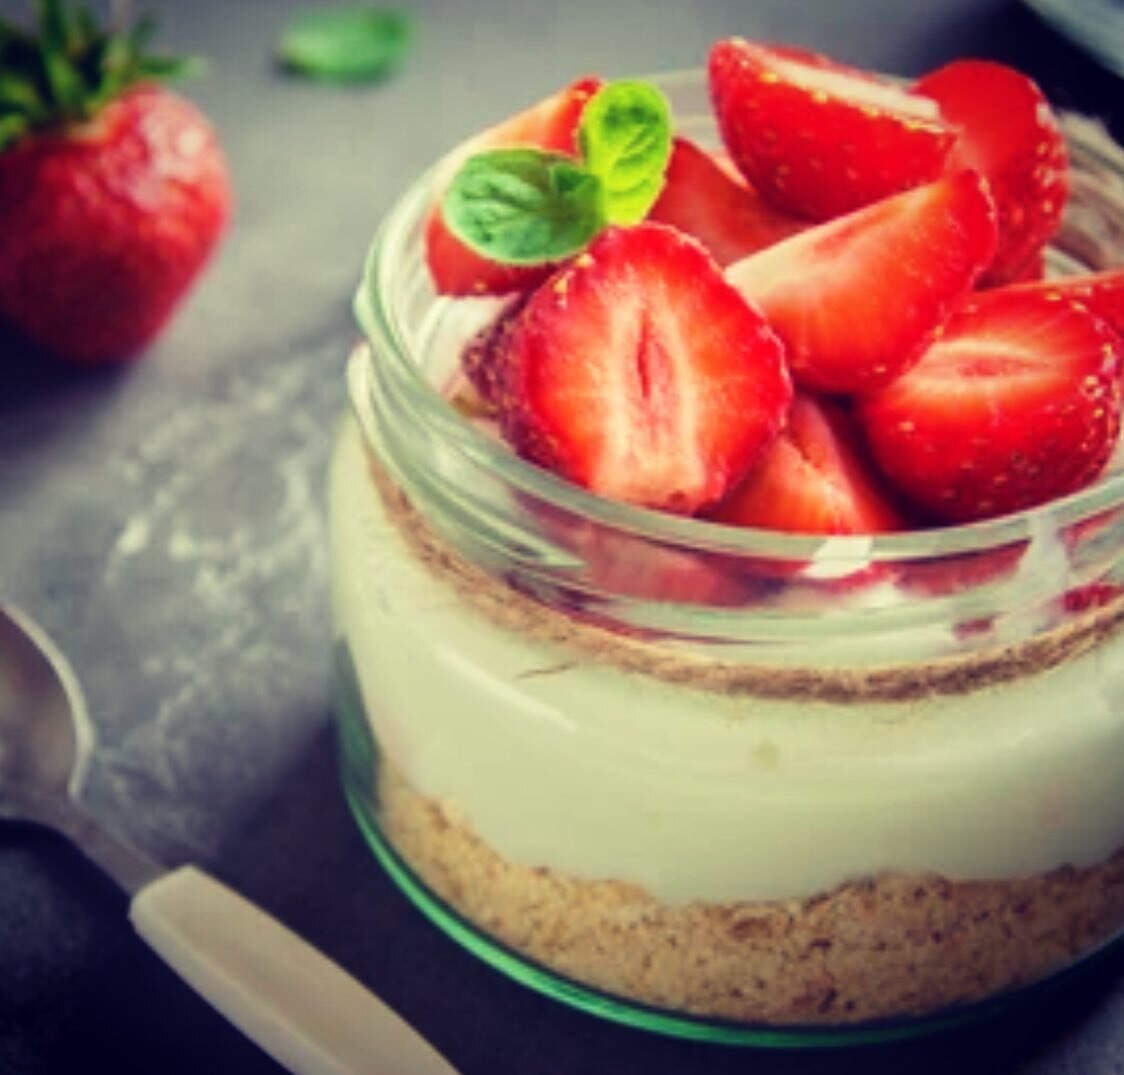 #FRIDAYNIGHTLIVE #FNL #NOTSOLOCKEDDOWNLIVE

Yo yo yo! It&rsquo;s by far the most popular #FNL week, dessert! Going super simple this week with cheesecake in a jar, set in the fridge, take to your mates BBQ, look good and receive great feedback for ha